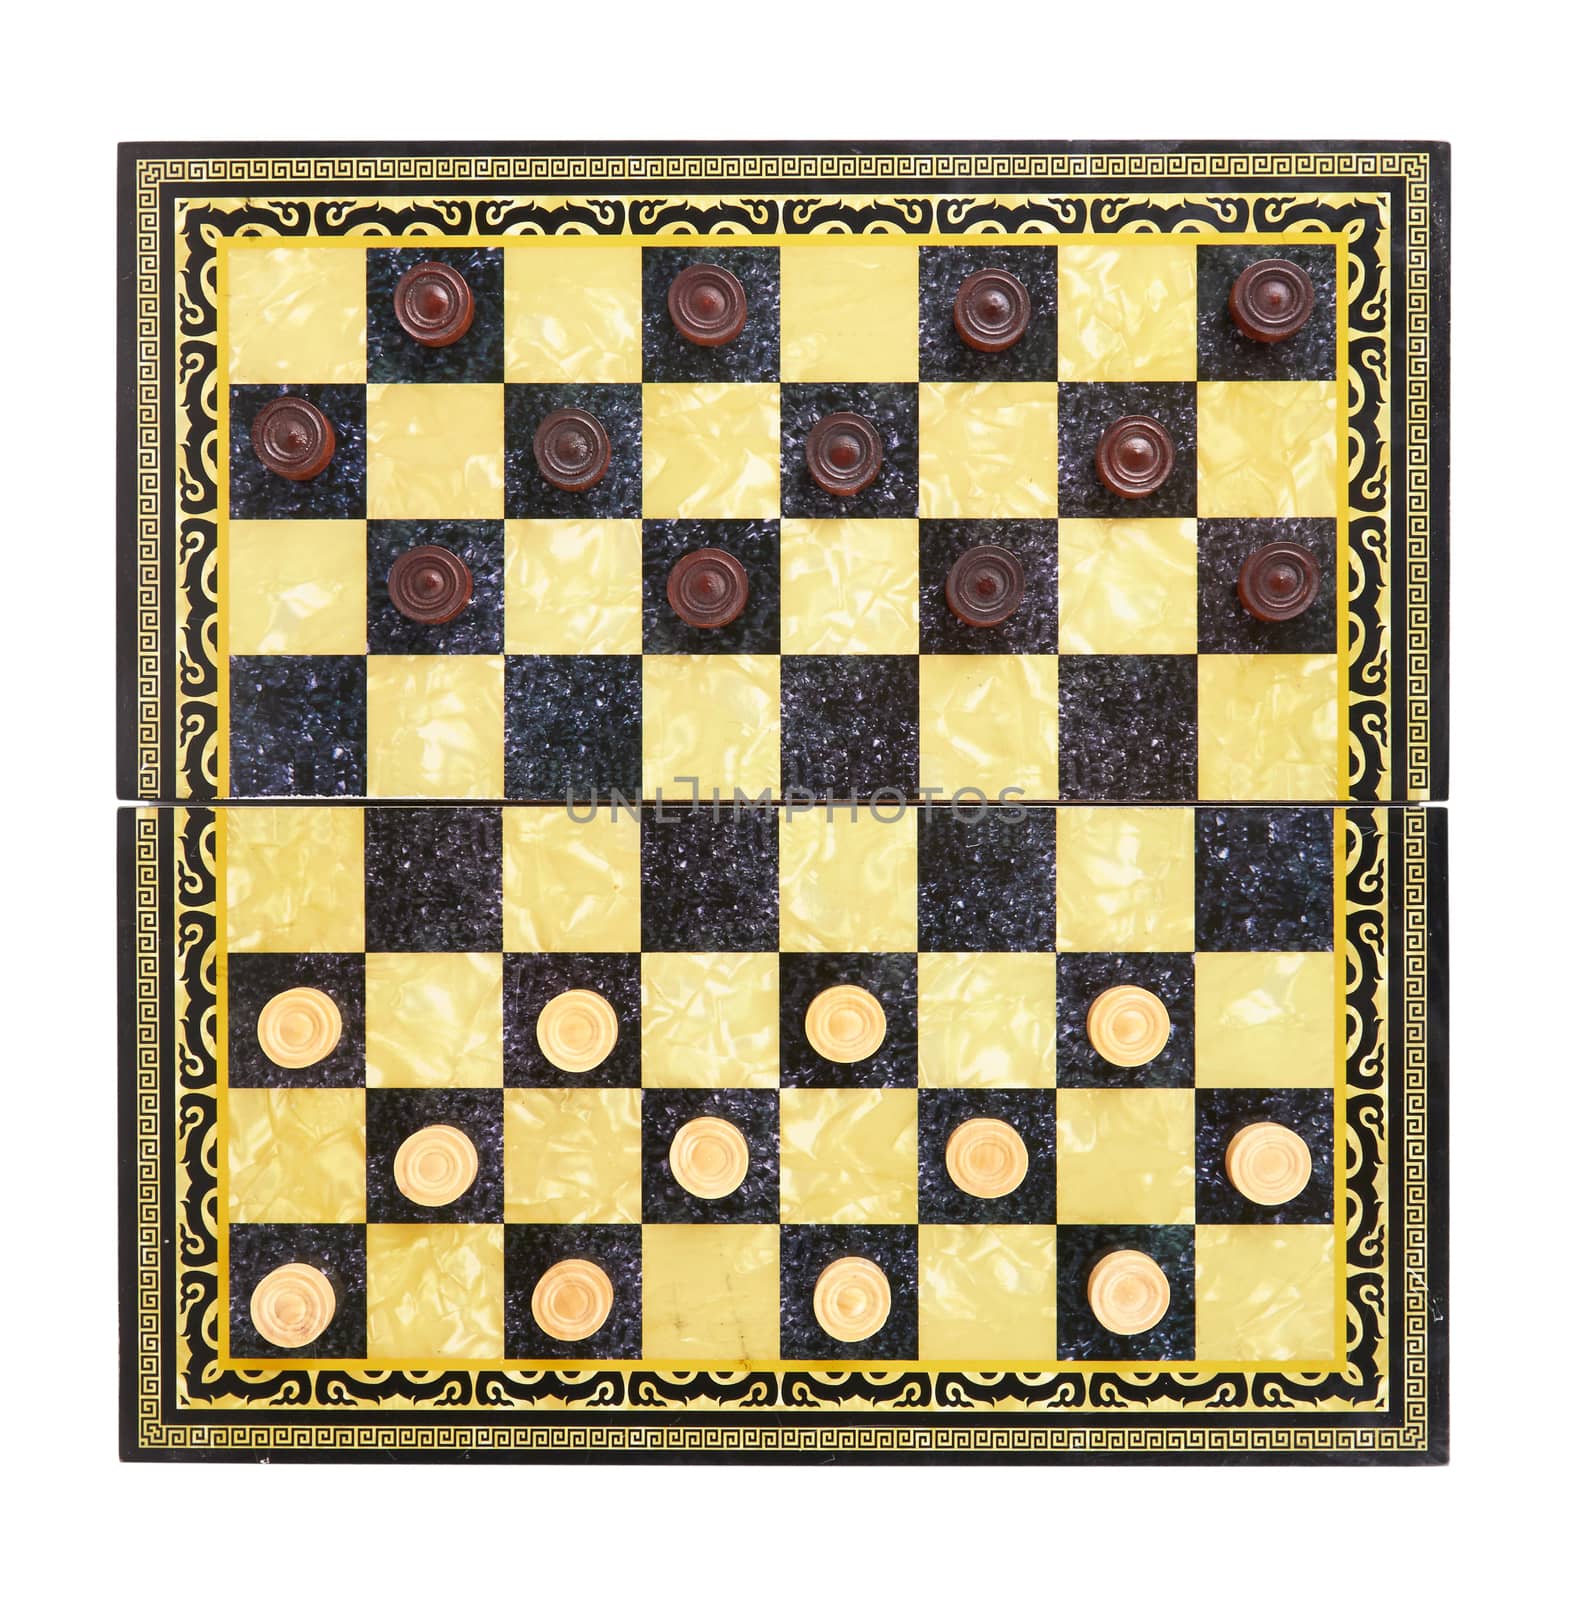 checkers by pioneer111